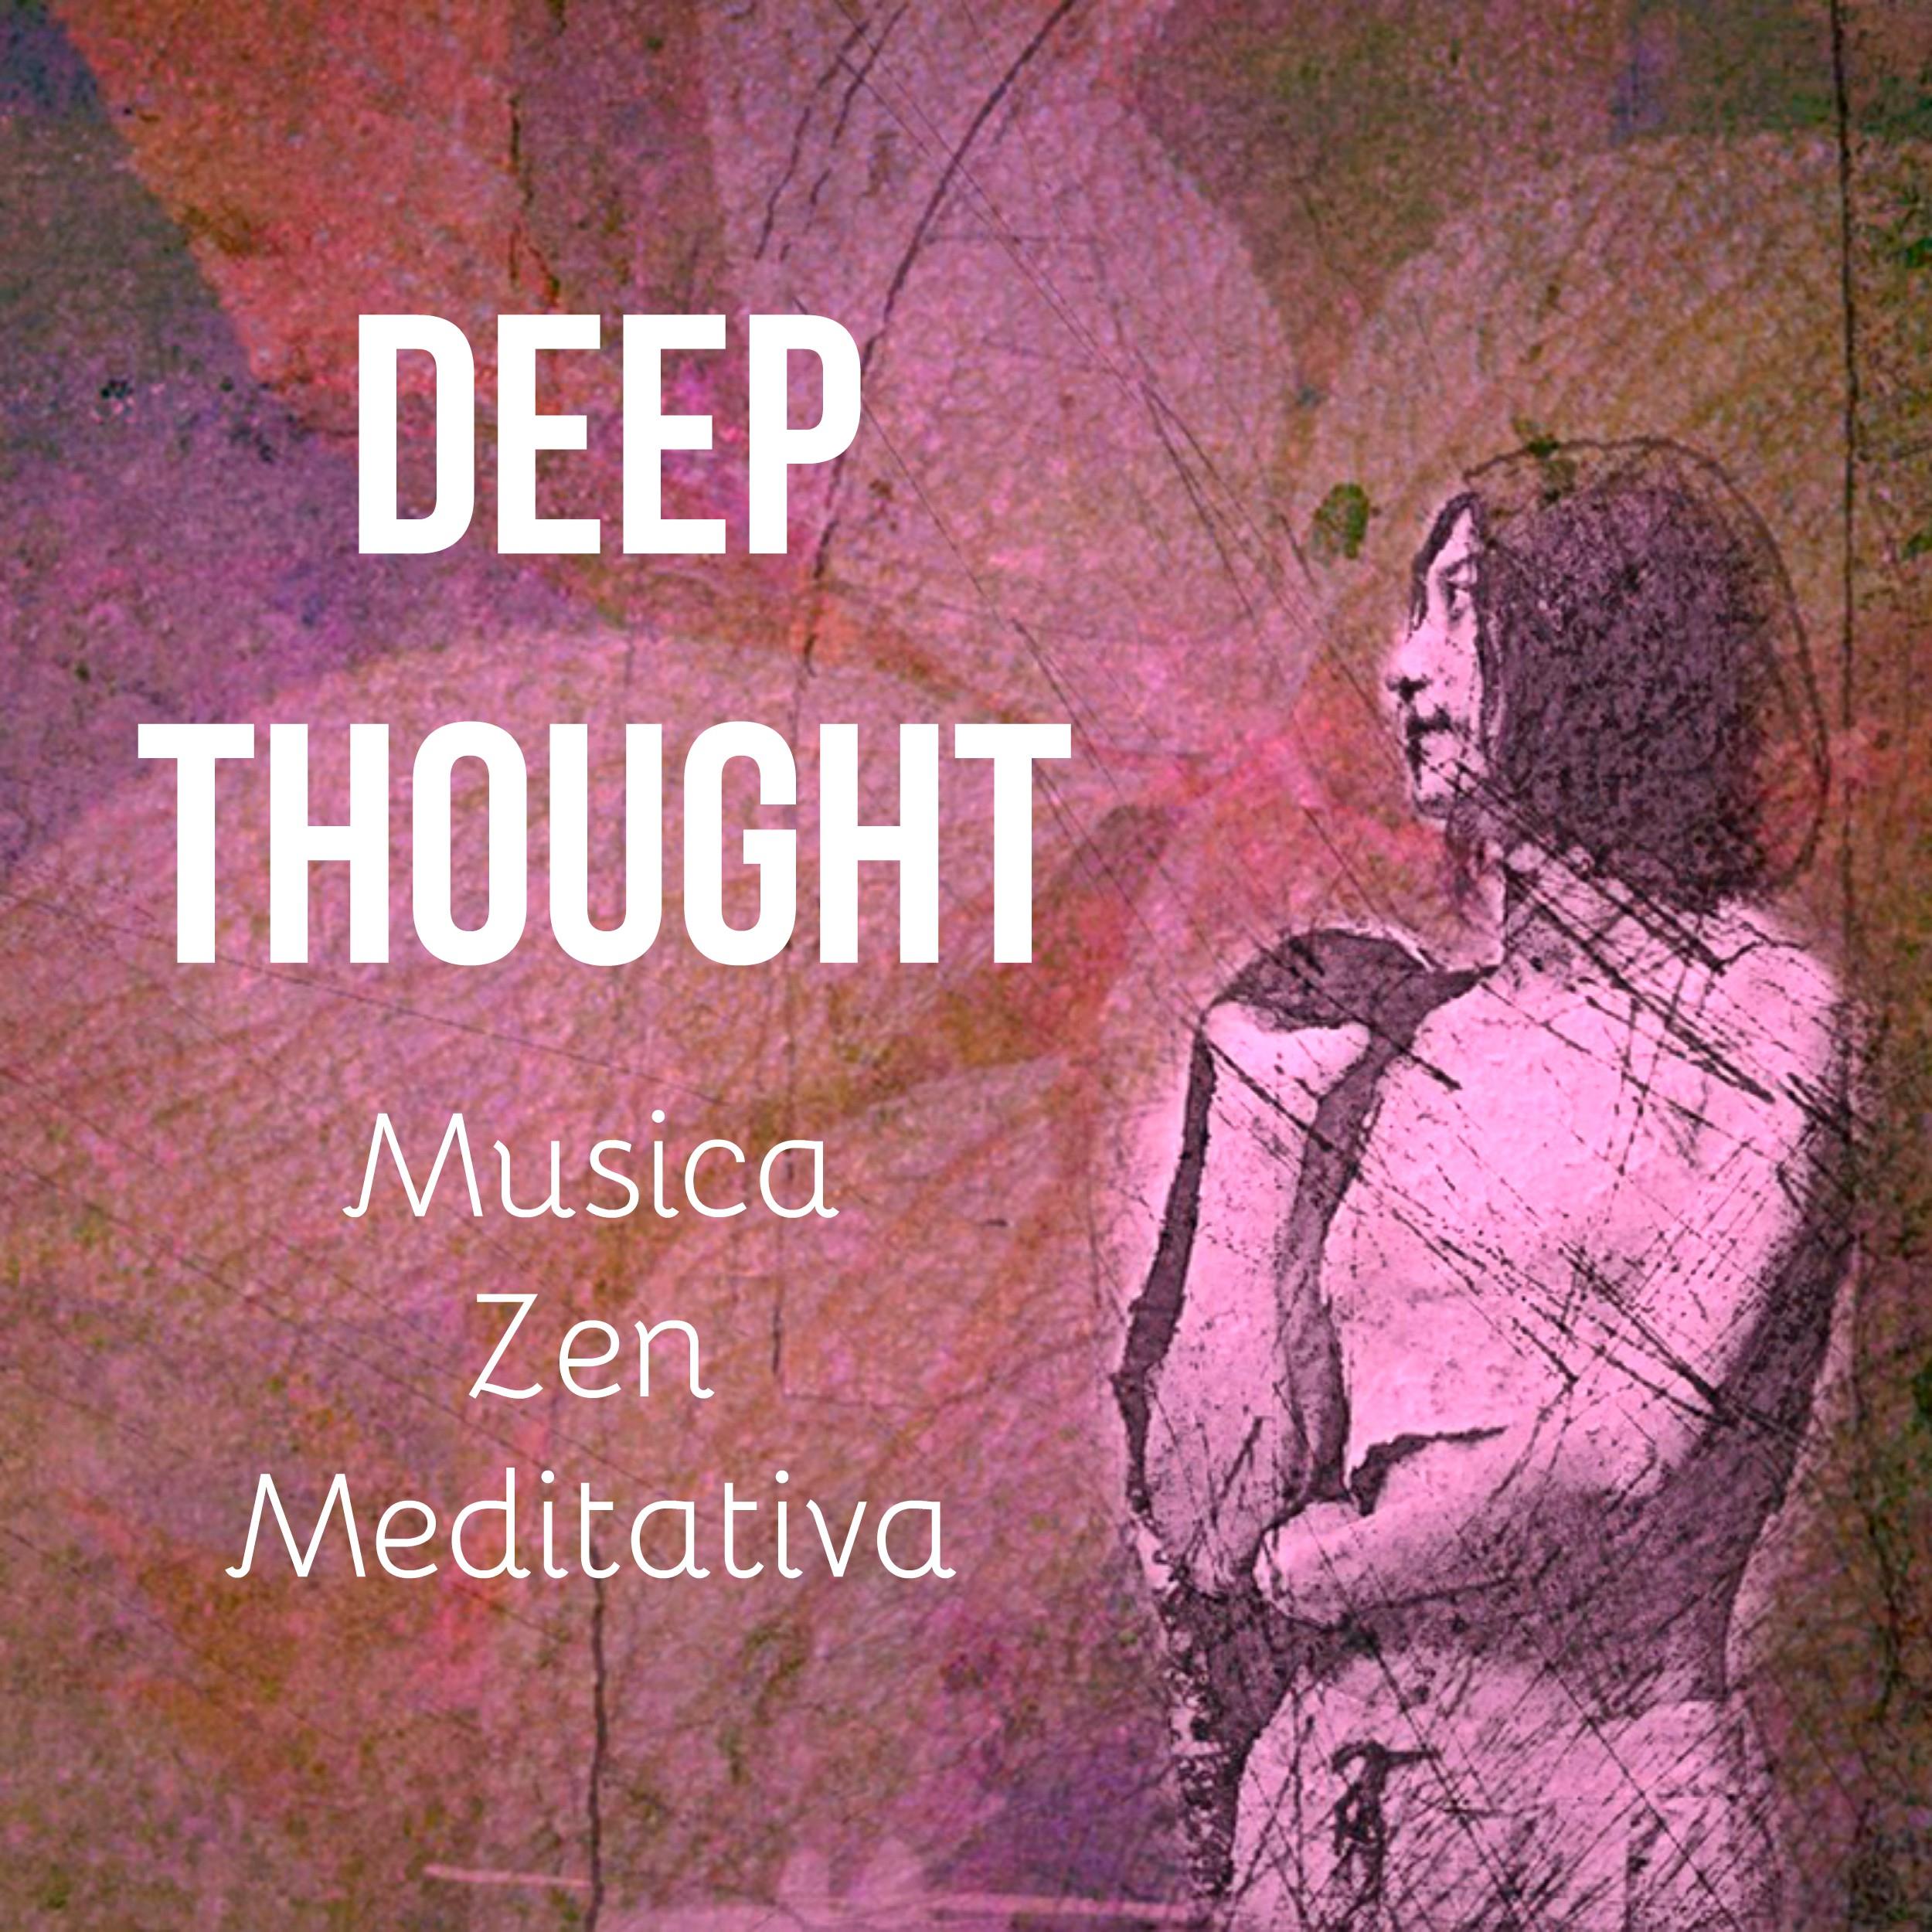 Amazing Music for deep Relaxation